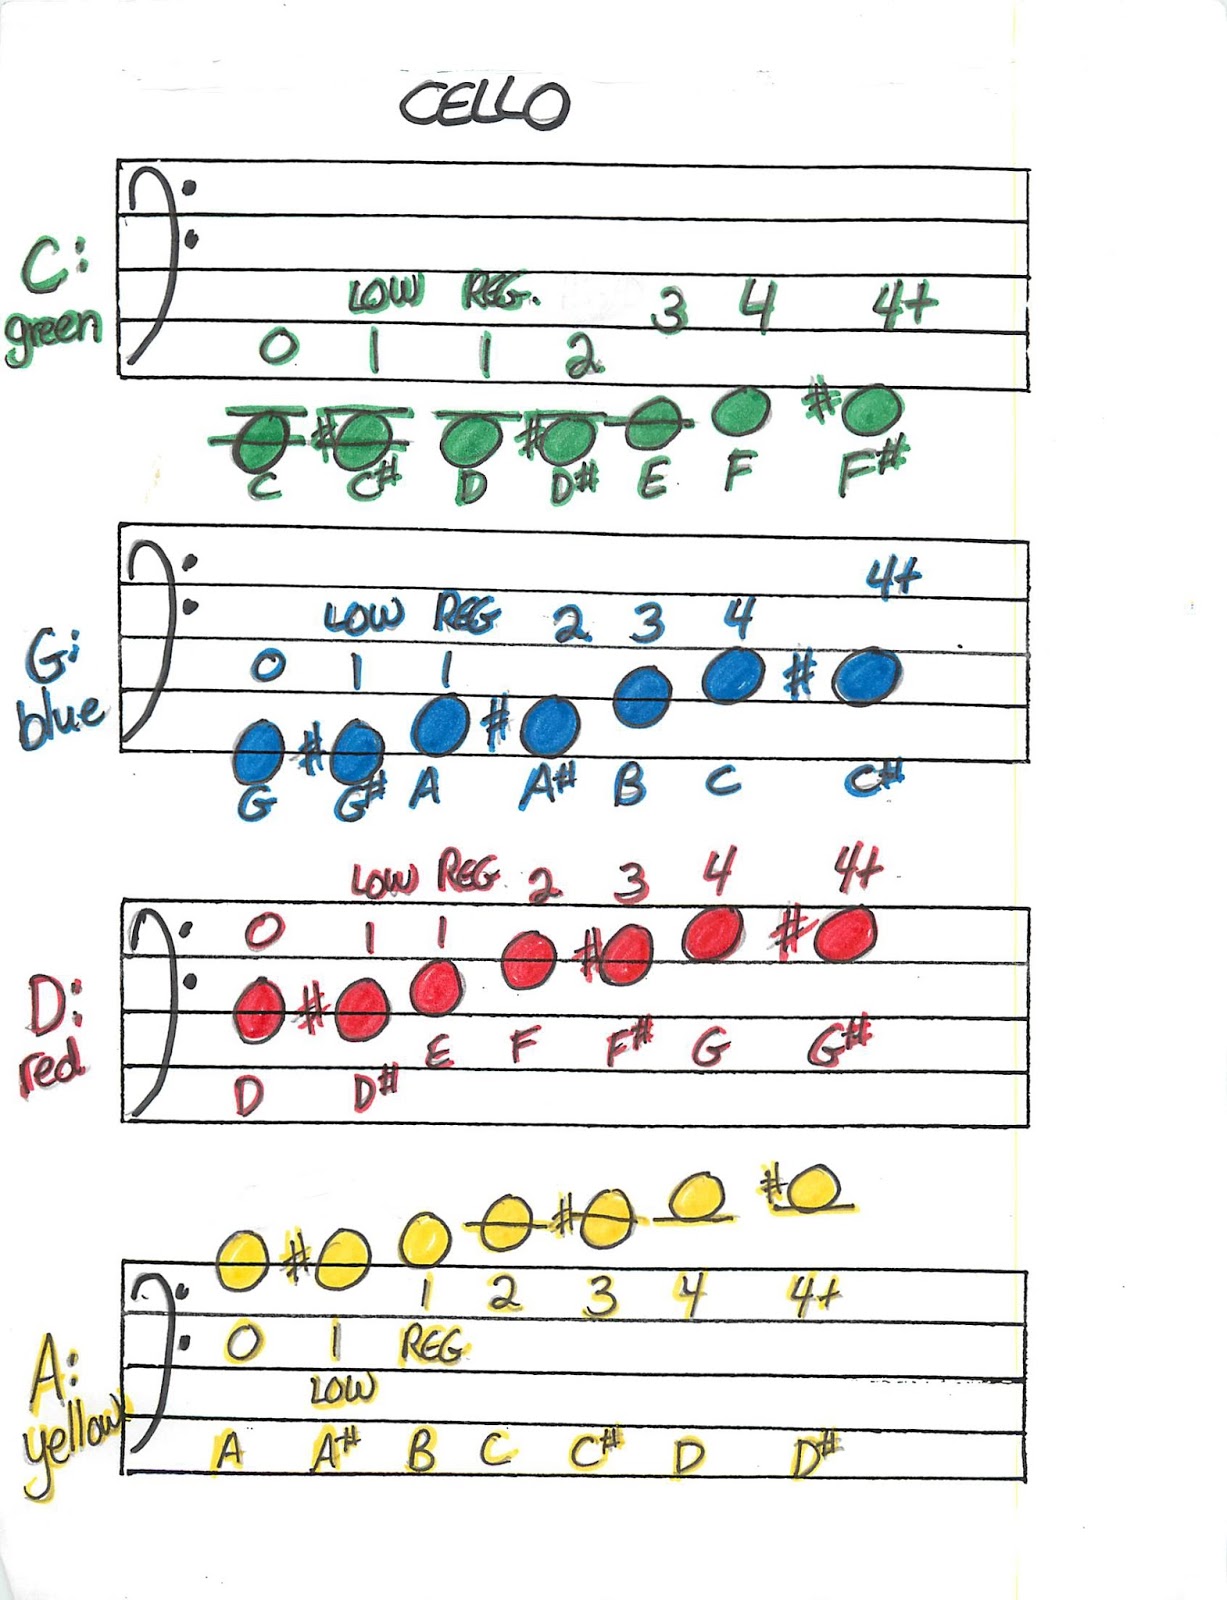 Miss Jacobson's Music: SCALES and FINGERING CHARTS FOR BEGINNING ORCHESTRA